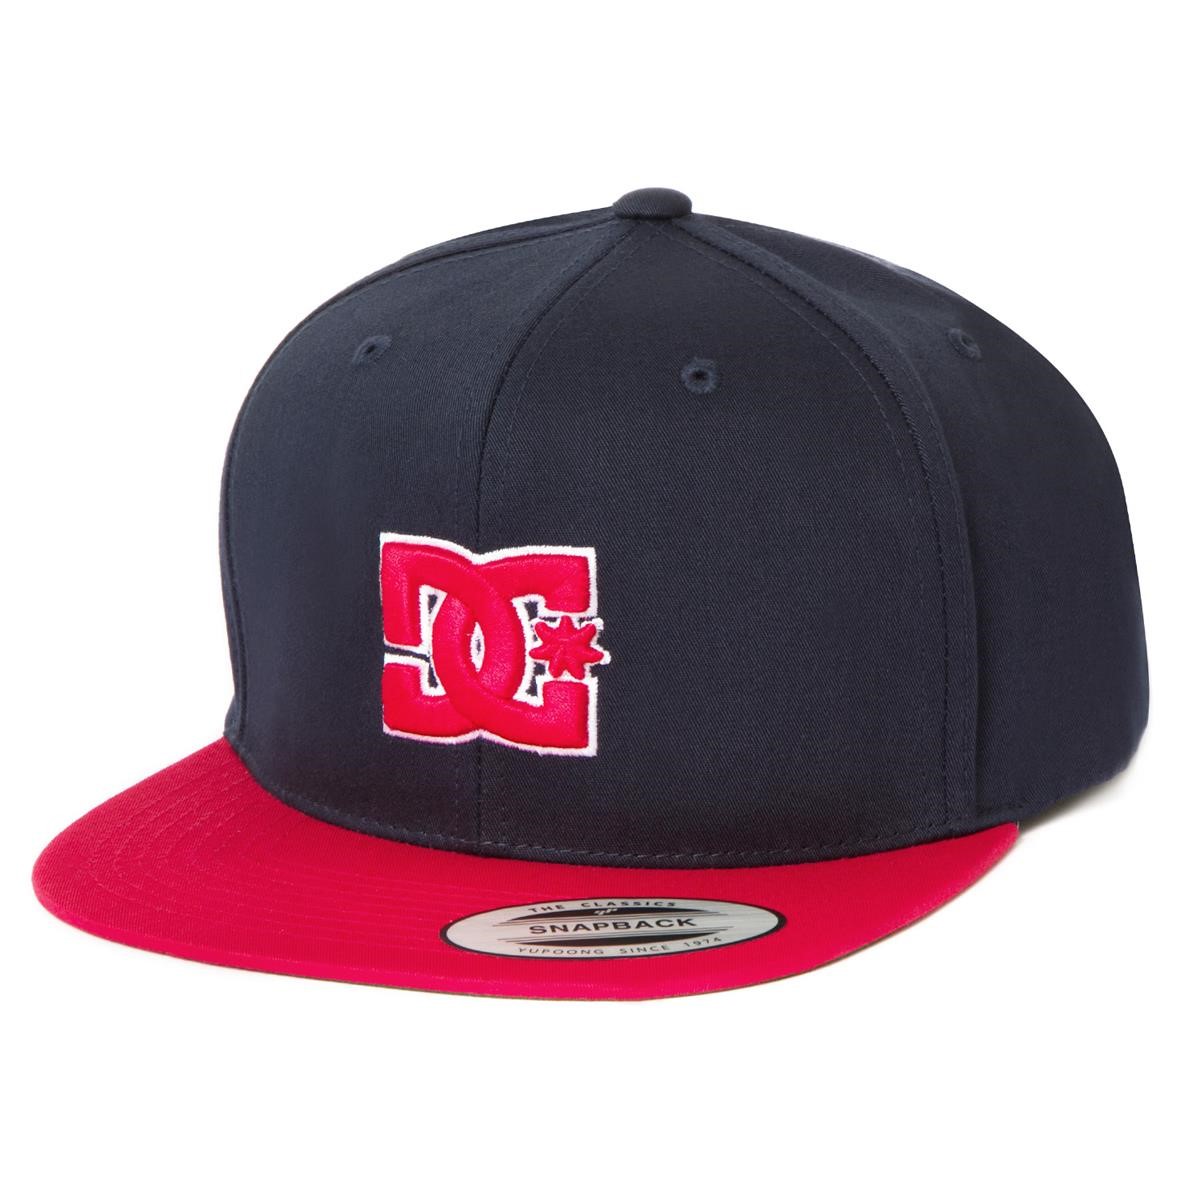 DC Cap Snappy DC Navy/Red